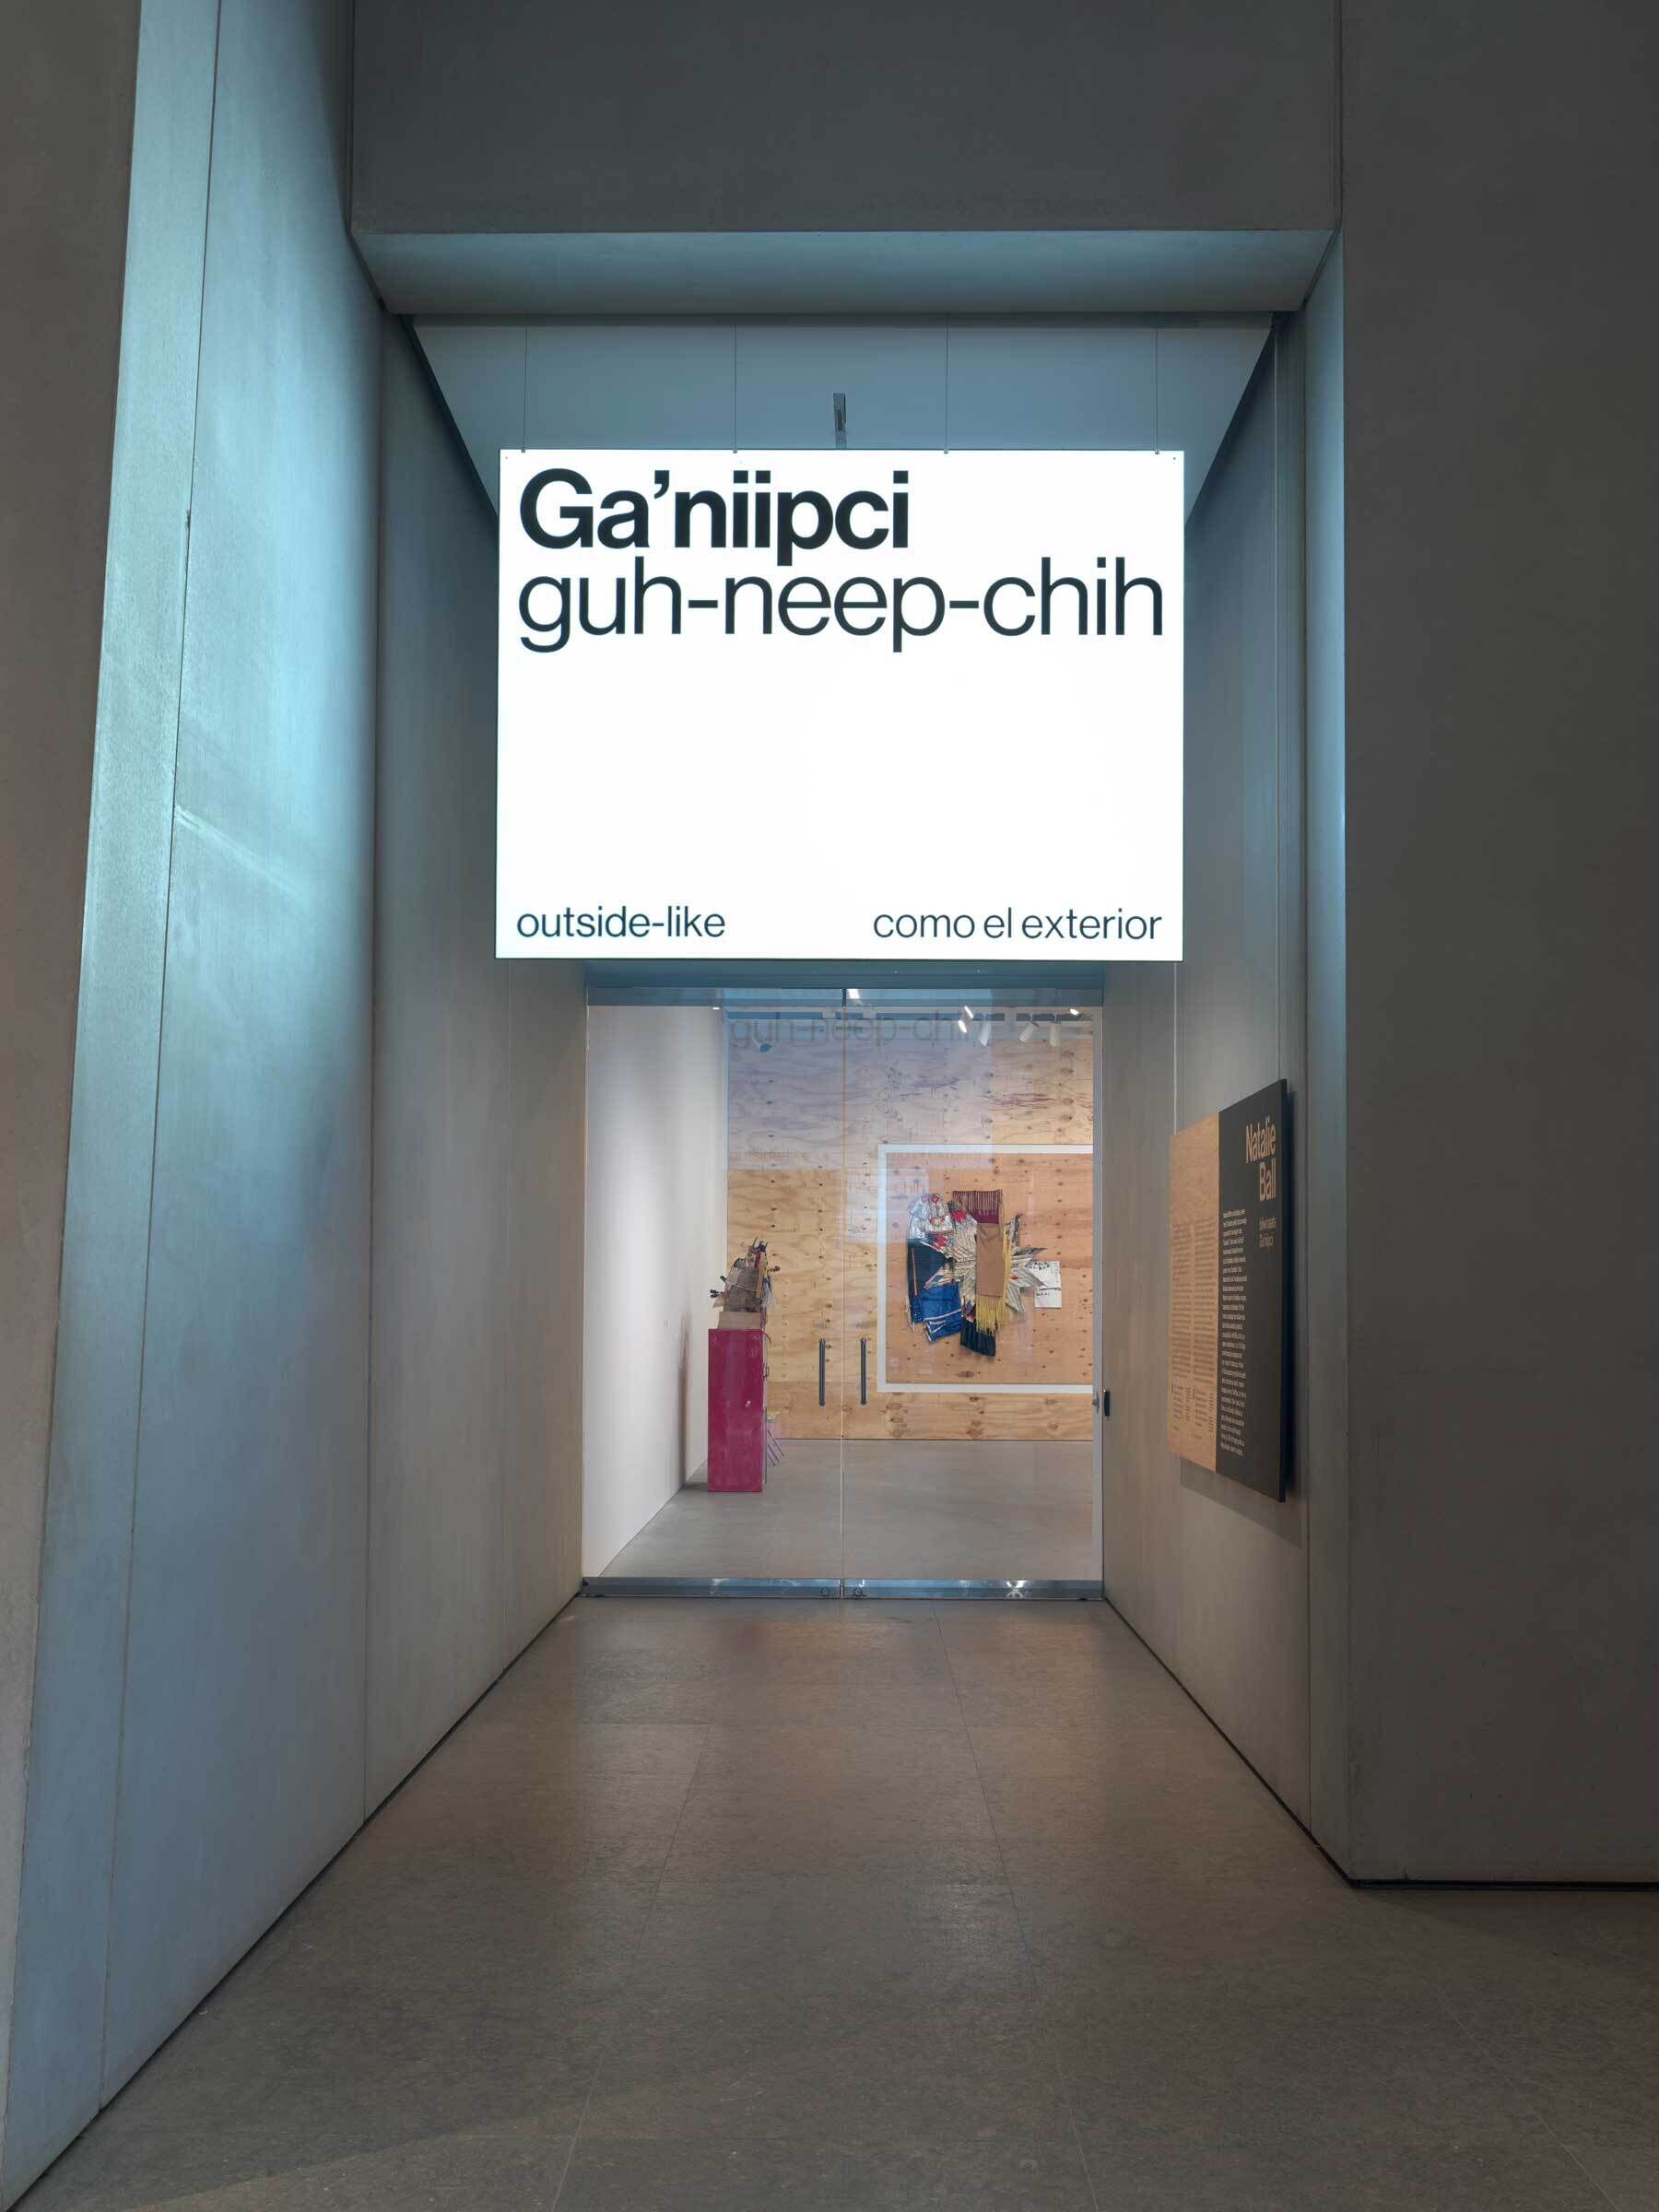 A museum corridor with a sign overhead displaying words in three languages, leading to an exhibition space.